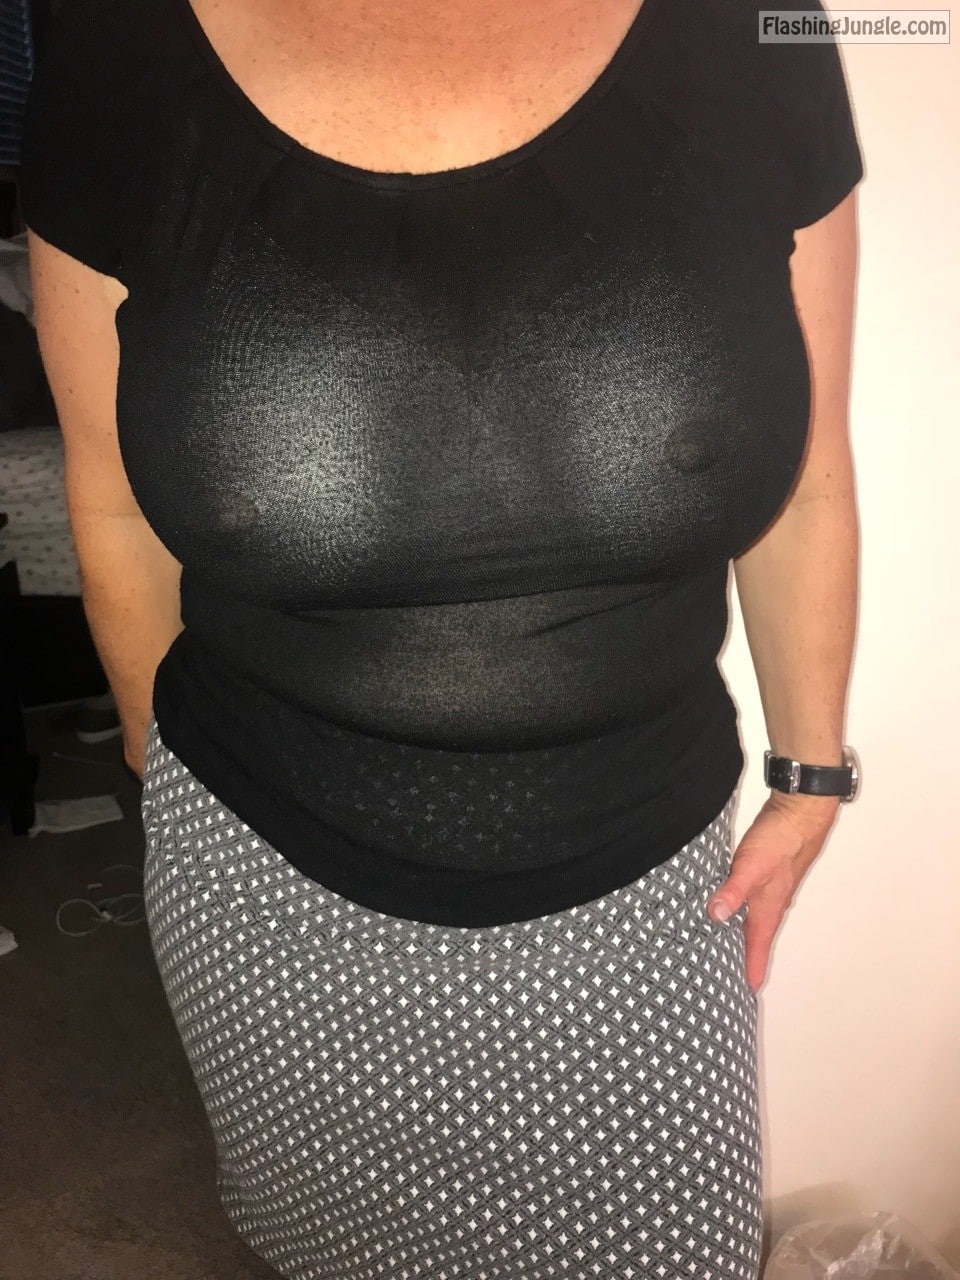 best tv cleavage - best friend’s wife welcome - Public Flashing Pics